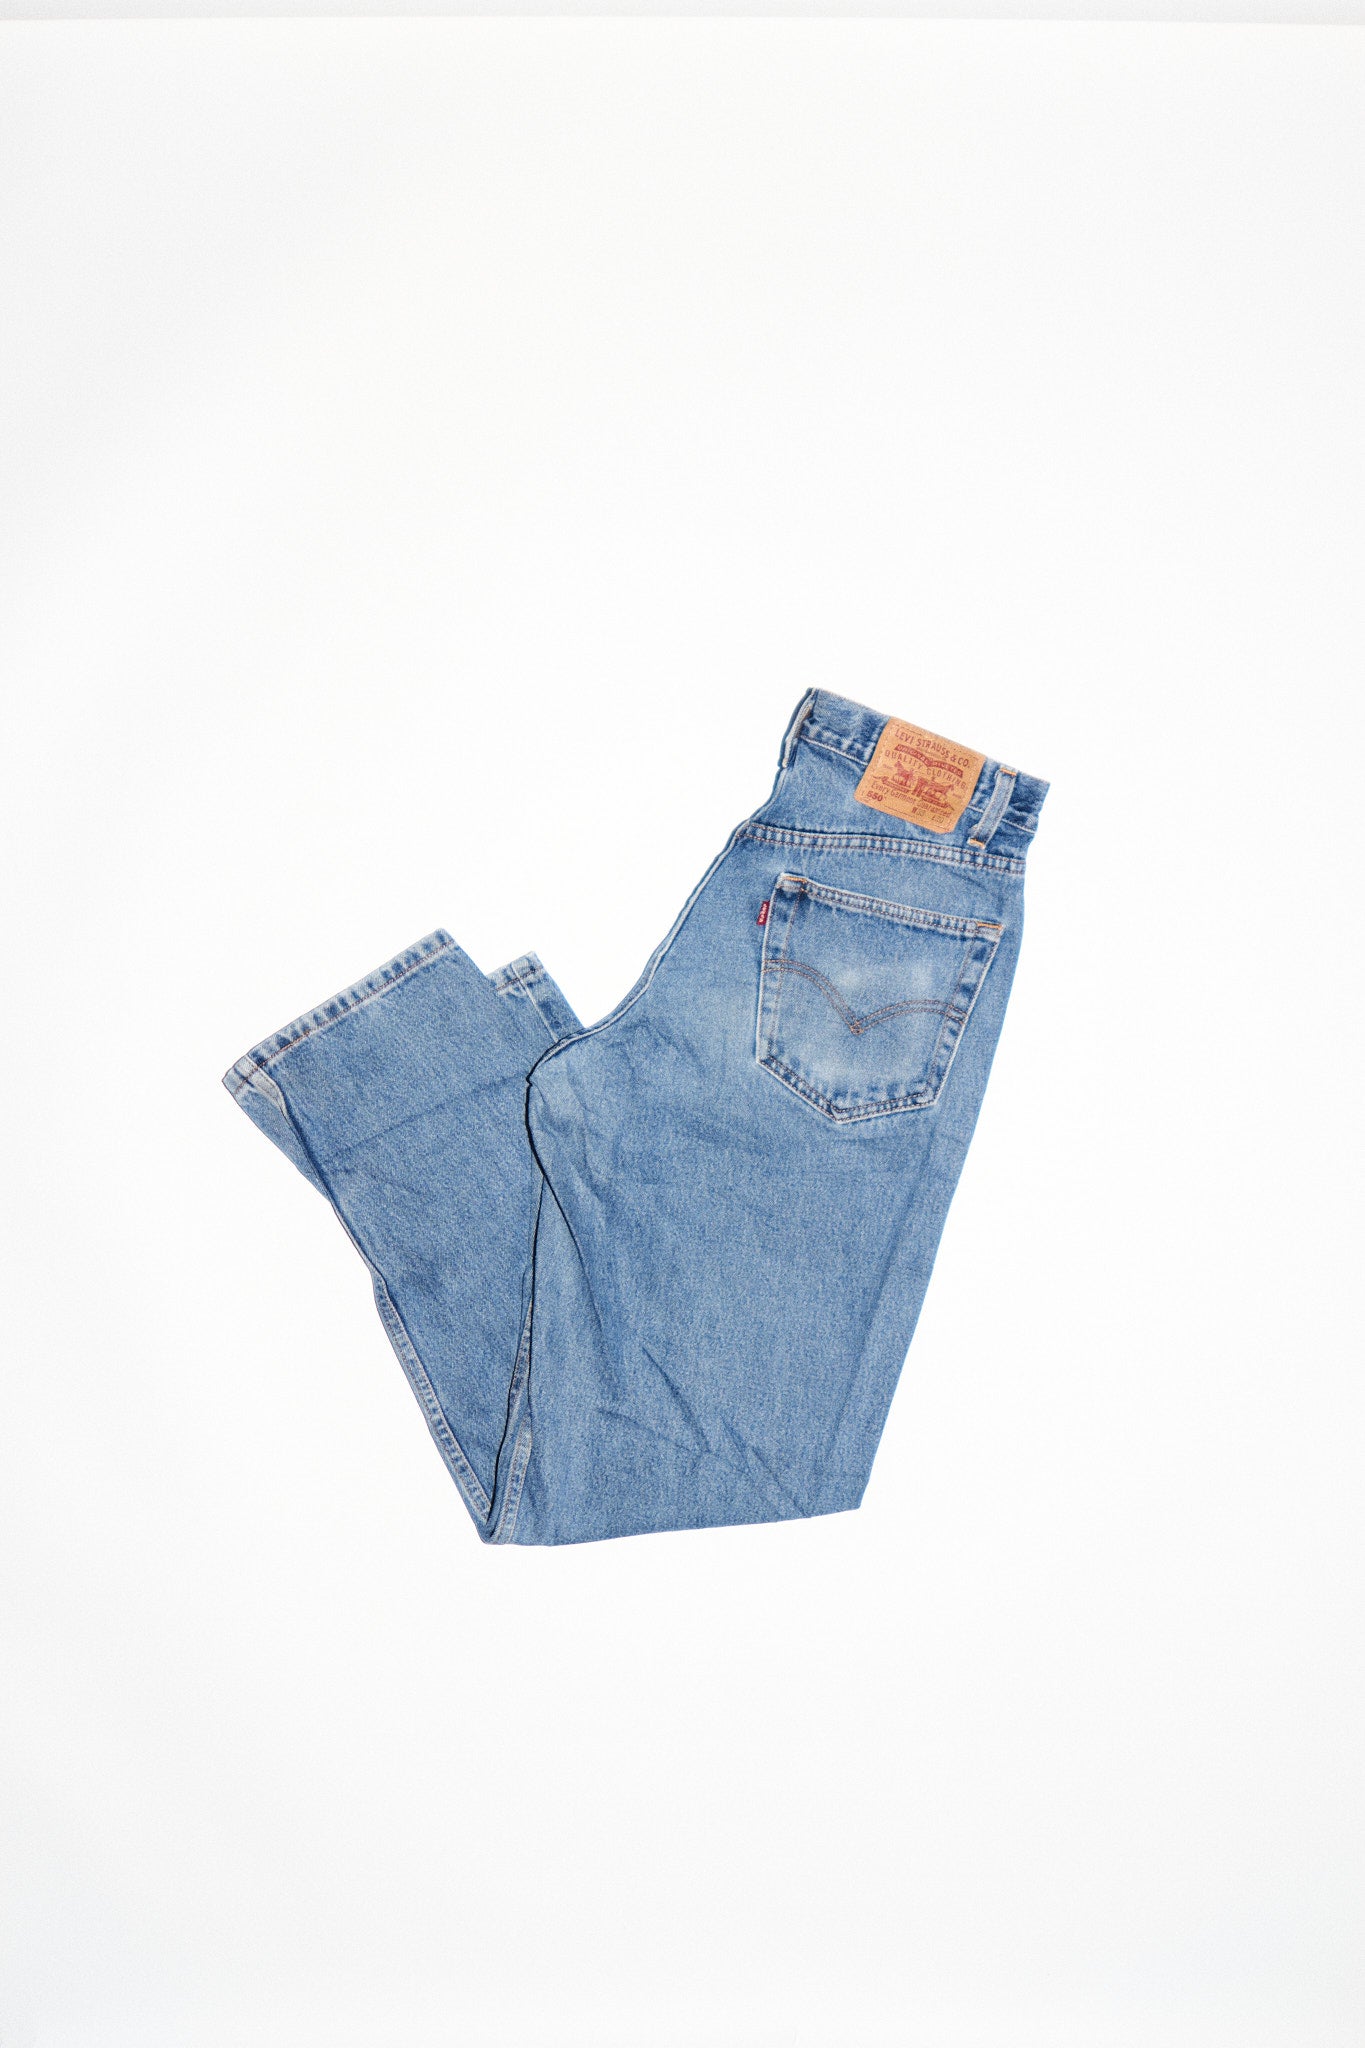 LEVI'S 550 RELAXED FIT W33 L30